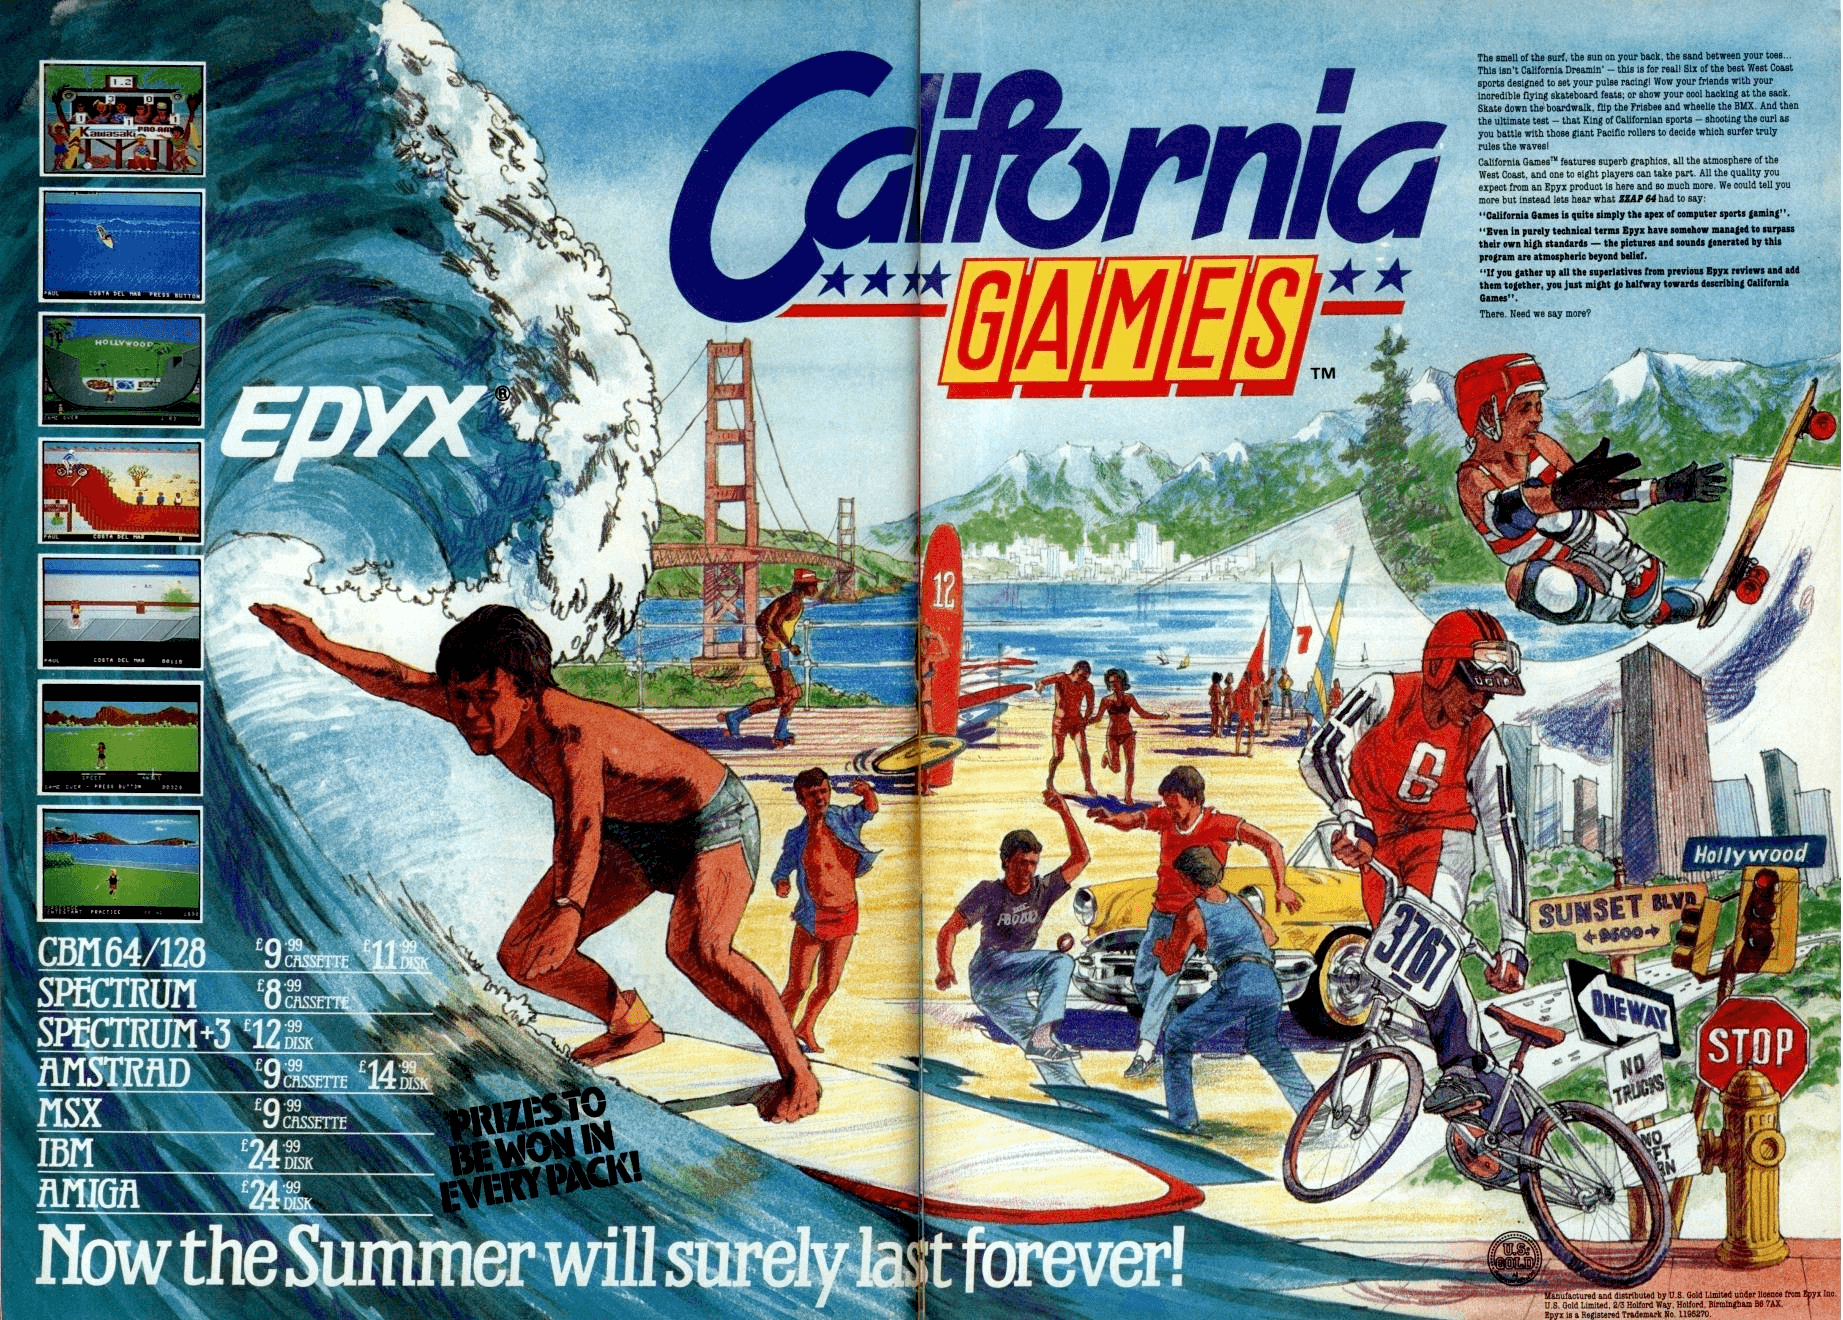 Image For Post | Description
California Games was the original "Extreme Games" – what today's generation might call "X-Games in the sun". Players can select sponsors (absent in some versions) and compete in events such as skateboarding, footbag, surfing, roller skating, flying disc (frisbee) and BMX. The surfing event is ranked by judges, which give a score to help the players improve their routine.

Trivia

Atari 2600 version 

The Atari 2600 version of California Games, released in the later years of Atari's dominance in the Home Video Game market, was one of a handful of games that used 16K of memory. The Atari 2600 had been designed to only run cartridges of 2K and 4K in size. Games that were written to exceed that 4K memory limitation required the "bank swapping" technique in order to access 8K, 12K, and even 16K game cartridges.

Memory was still expensive in the 1980's, yet the public wanted more and more advanced games, especially since it had been several years now since the release of the many popular 8-bit home computer systems that had been flooding the market and reducing in cost. And with the Nintendo Entertainment System having just been released, the Atari 2600 was beginning to look very dated. In order to satisfy the public’s craving for games requiring increasing amounts of memory, creating a bigger game for the Atari 2600 was the only way to do it.

In order to handle the expansiveness of their games, Epyx released all three of their Olympic-based games with multiple ROM chips equaling the necessary 16K. Using bank-swapping, the various ROM chips could be accessed and swapped as needed. And all of it was embedded within a standard-sized Atari 2600 Cartridge! 

The Atari versions (2600 and Lynx) of the game omit the flying disc and roller skating events, while the Genesis version omits only the flying disc event.

Gags
During the flying disc event, if you leave the controls alone for long enough, you will see an alien abducting your partner on the radar, along the top of the screen (see screenshots). 

Graphics [PC] 

California Games was one of the handful of games released that pushed CGA to its limits by using a timing/hardware trick to get more colors on the screen. It called this trick "MORE-color" mode (as opposed to the normal "4-color" mode), and it achieved 7 different colors on the same screen by switching from one color palette to another at a particular scanline. The switch was masked fairly well by:

   1. making sure that the graphics had a horizontal boundary somewhere on the screen that wouldn't look funny by a color switch, and
   2. switching from the red-green-yellow palette to a tweaked red-cyan-white palette and using the common red color to mask the switch. 

While this technique has been used in other games (like Jungle Hunt), none did it so well as in California Games.

This technique will only work on 4.77MHz machines, as the timing required to change the palette is very exacting. Also, there is no way to capture, with a program, these screenshots; they had to be captured normally, then changing the used colors where the split occurred. They are identical to what's displayed on the screen, however, down to the additional color split in the names at the bottom of the title screen. ) 

Lynx version

    - While the rollerskating event [and flying disc] was taken out of the Lynx version of the game, you can still see the rollerskating girl skate by during the high-score screen.
    - While the Lynx version of the game only officially supports 2 players, you can ComLynx up to four if everyone turns on their Lynxes simultaneously. It may take a couple of tries, but it is possible. Gameplay is slightly slower in this mode whenever more than two players are onscreen at the same time.
    - In the Lynx version, the wave in the surfing section moves from right to left. In all other versions of the game, the wave moves from left to right.

Manual
In the Lynx version's manual, it reads: "Score an extra 50 points for hitting the seagull in the beak with the foot bag (but only in this game -- be kind to the birdies in the other events)."
Music
The main theme song is a cover of Richard Berry's Louie Louie, later made famous by Kingsmen. 

RAM
When you play California Games on a PC with enough RAM, you'll get a message like this:

    You've got 167K RAM more than you need, Dude.
    That's gnarly!

Development
Several members of the development team moved on to other projects. Chuck Sommerville, the designer of the half-pipe game in California Games, later developed the game Chip's Challenge, while Ken Nicholson the designer of the footbag game, was the inventor of the technology used in Microsoft's DirectX. Kevin Norman, the designer of the BMX game, went on to found the educational science software company Norman &amp; Globus, makers of the ElectroWiz series of products.

The sound design for the original version of California Games was done by Chris Grigg, member of the band Negativland. 

Legacy
The game was followed in 1990 by California Games II, but the sequel failed to match the original's success.

More recently the game was released for mobile phones in the Java format, and current rights holders System 3 CEO Mark Cale has stated that the game will be available in future as both a retail product and an on-line product for the Sony PlayStation 3 and Nintendo Wii and Nintendo DS. The Commodore 64 version was released for the Wii's Virtual Console service in Europe on April 11, 2008 and in North America on July 6, 2009.[19] 

 Alternate Titles

    "Rad Games" -- Working title
    "Jogos de Verão" -- Brazilian SEGA Master System title
    "Calgames" -- Informal title